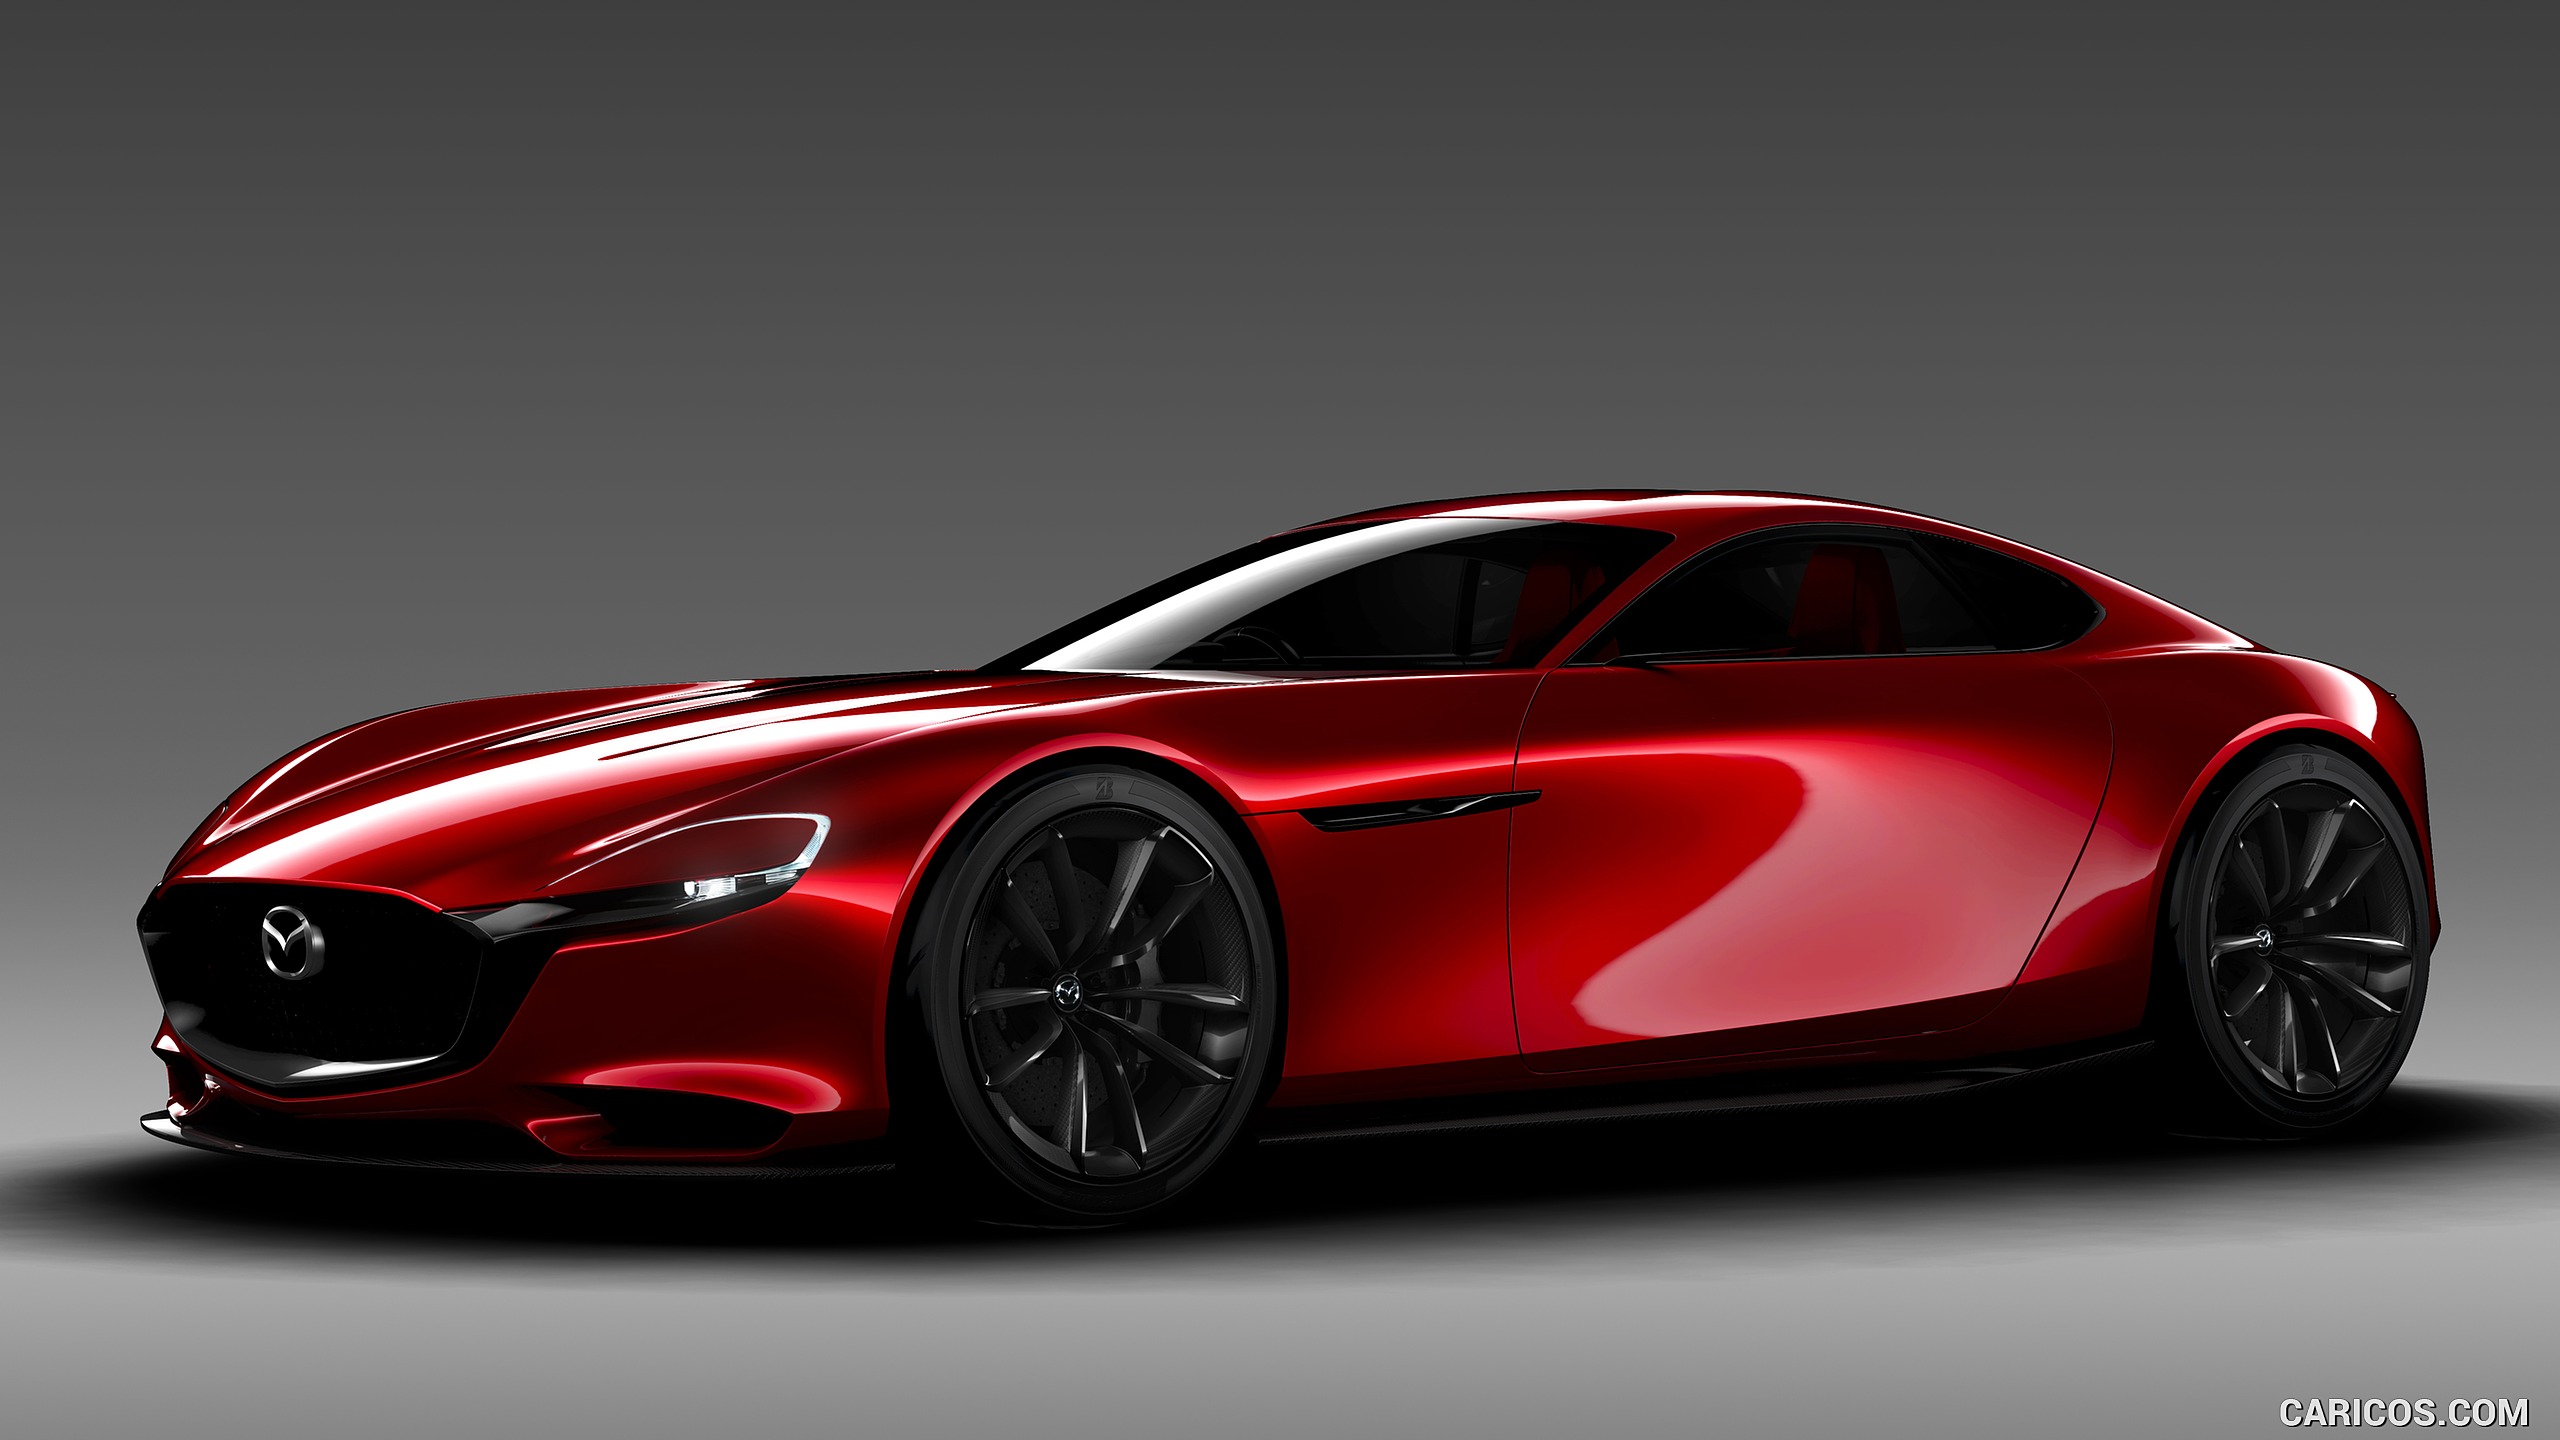 2015 Mazda RX-VISION Concept - Front, #11 of 16